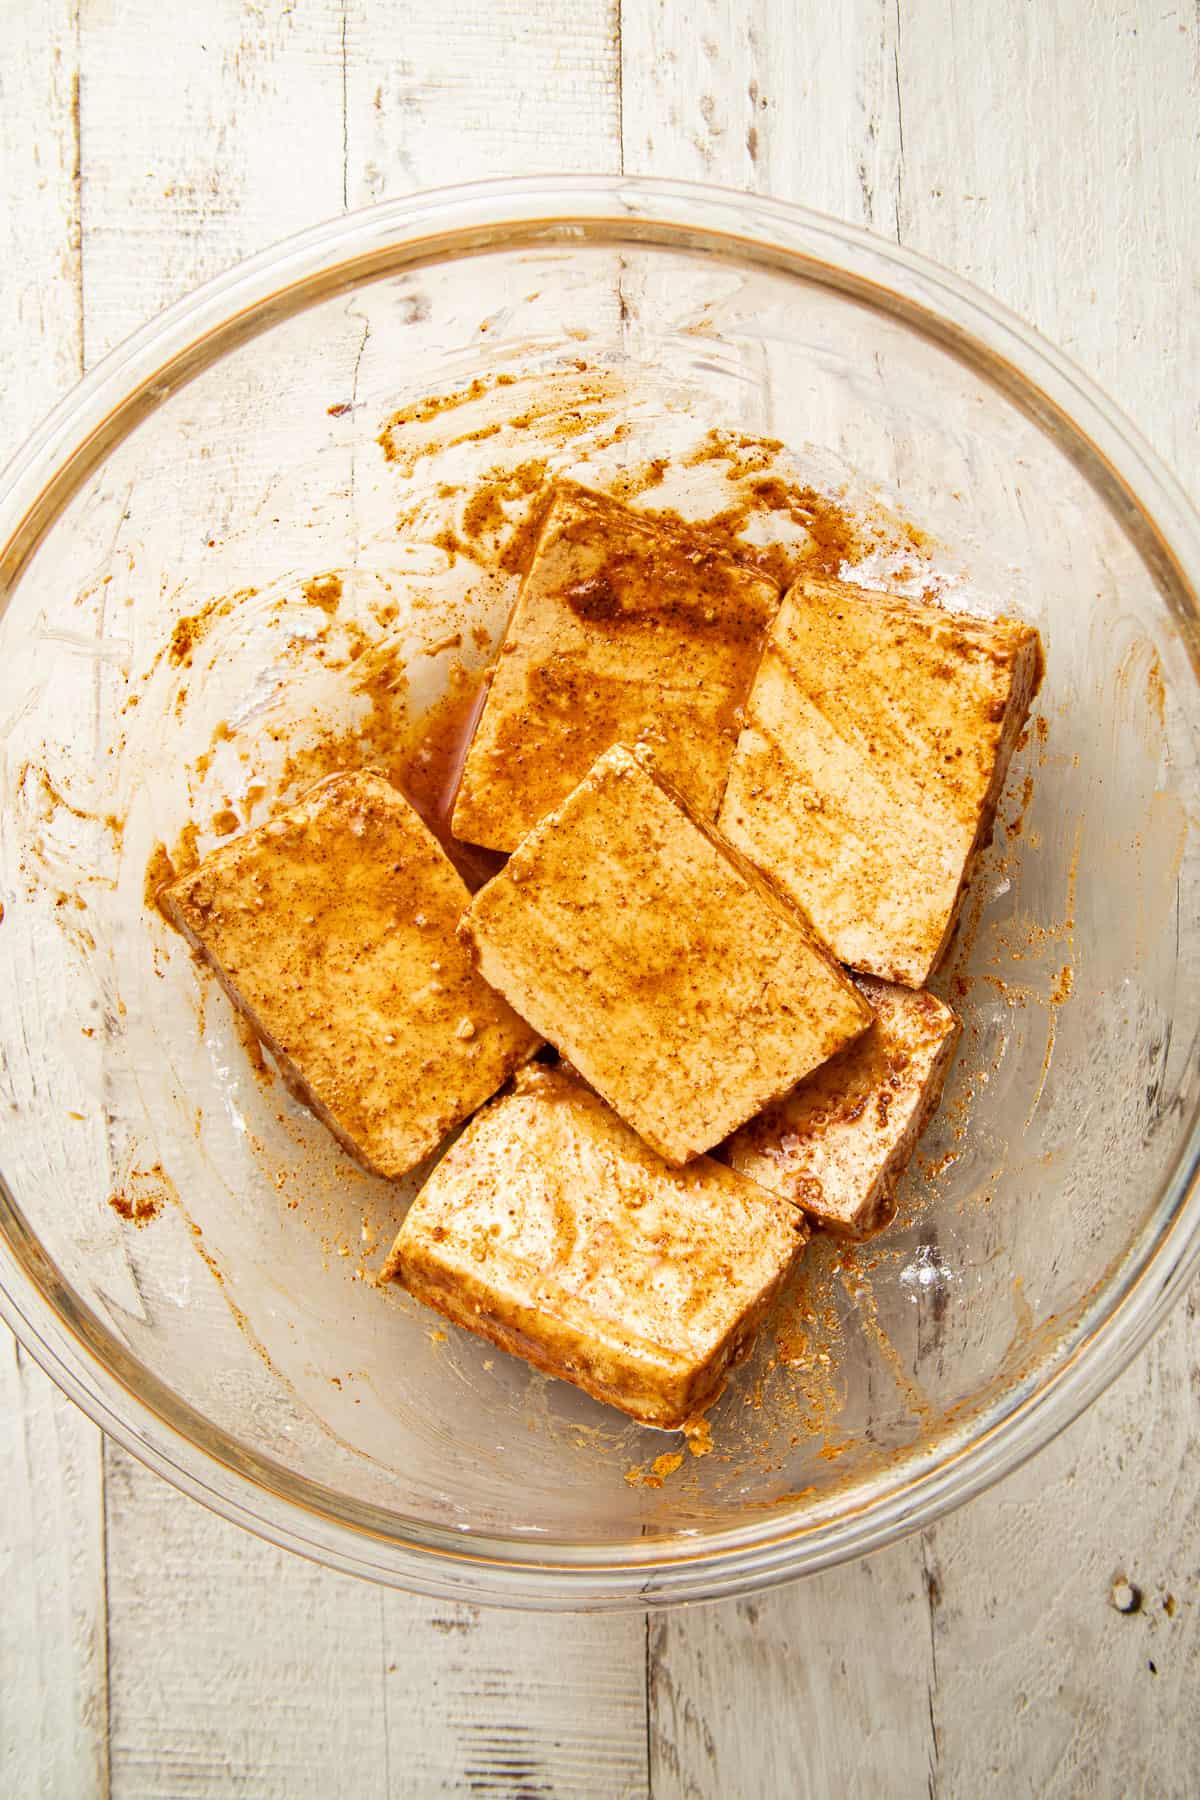 Tofu slices in a mixing bowl with oil, cornstarch, and spices.